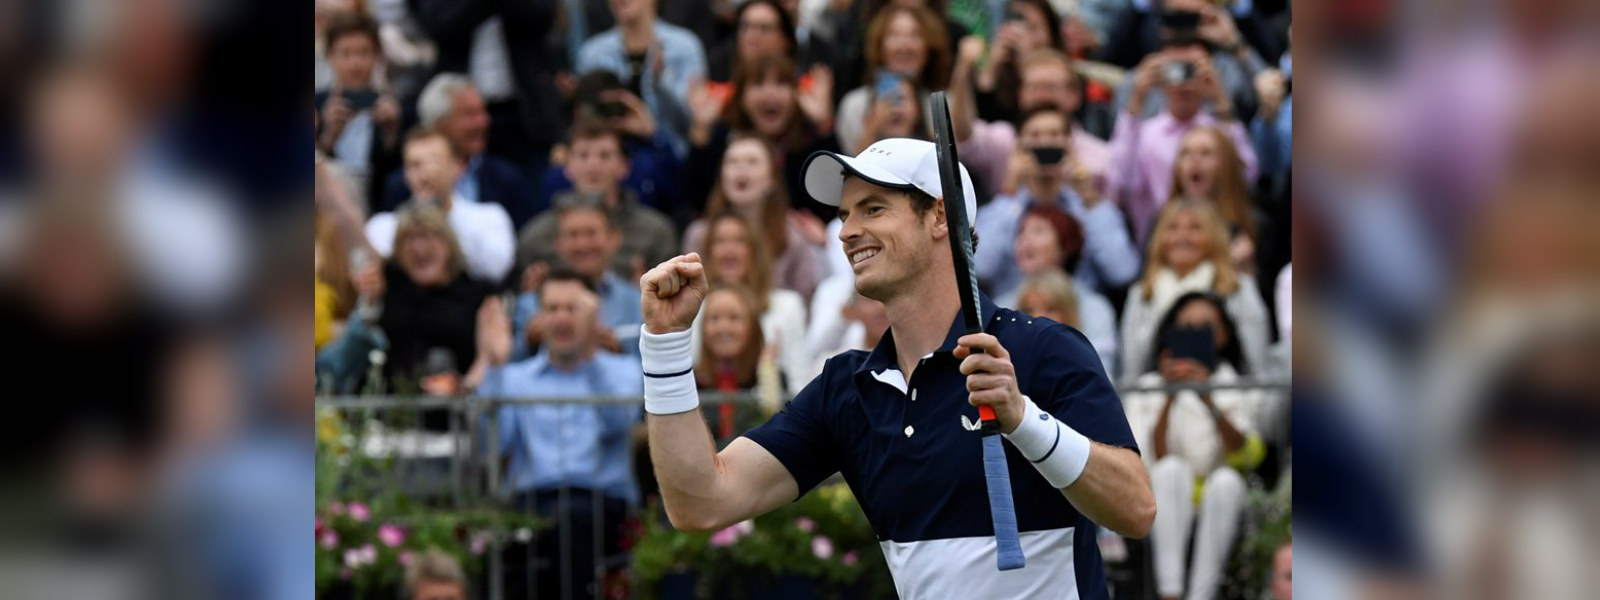 Andy Murray marks a successful return with doubles win